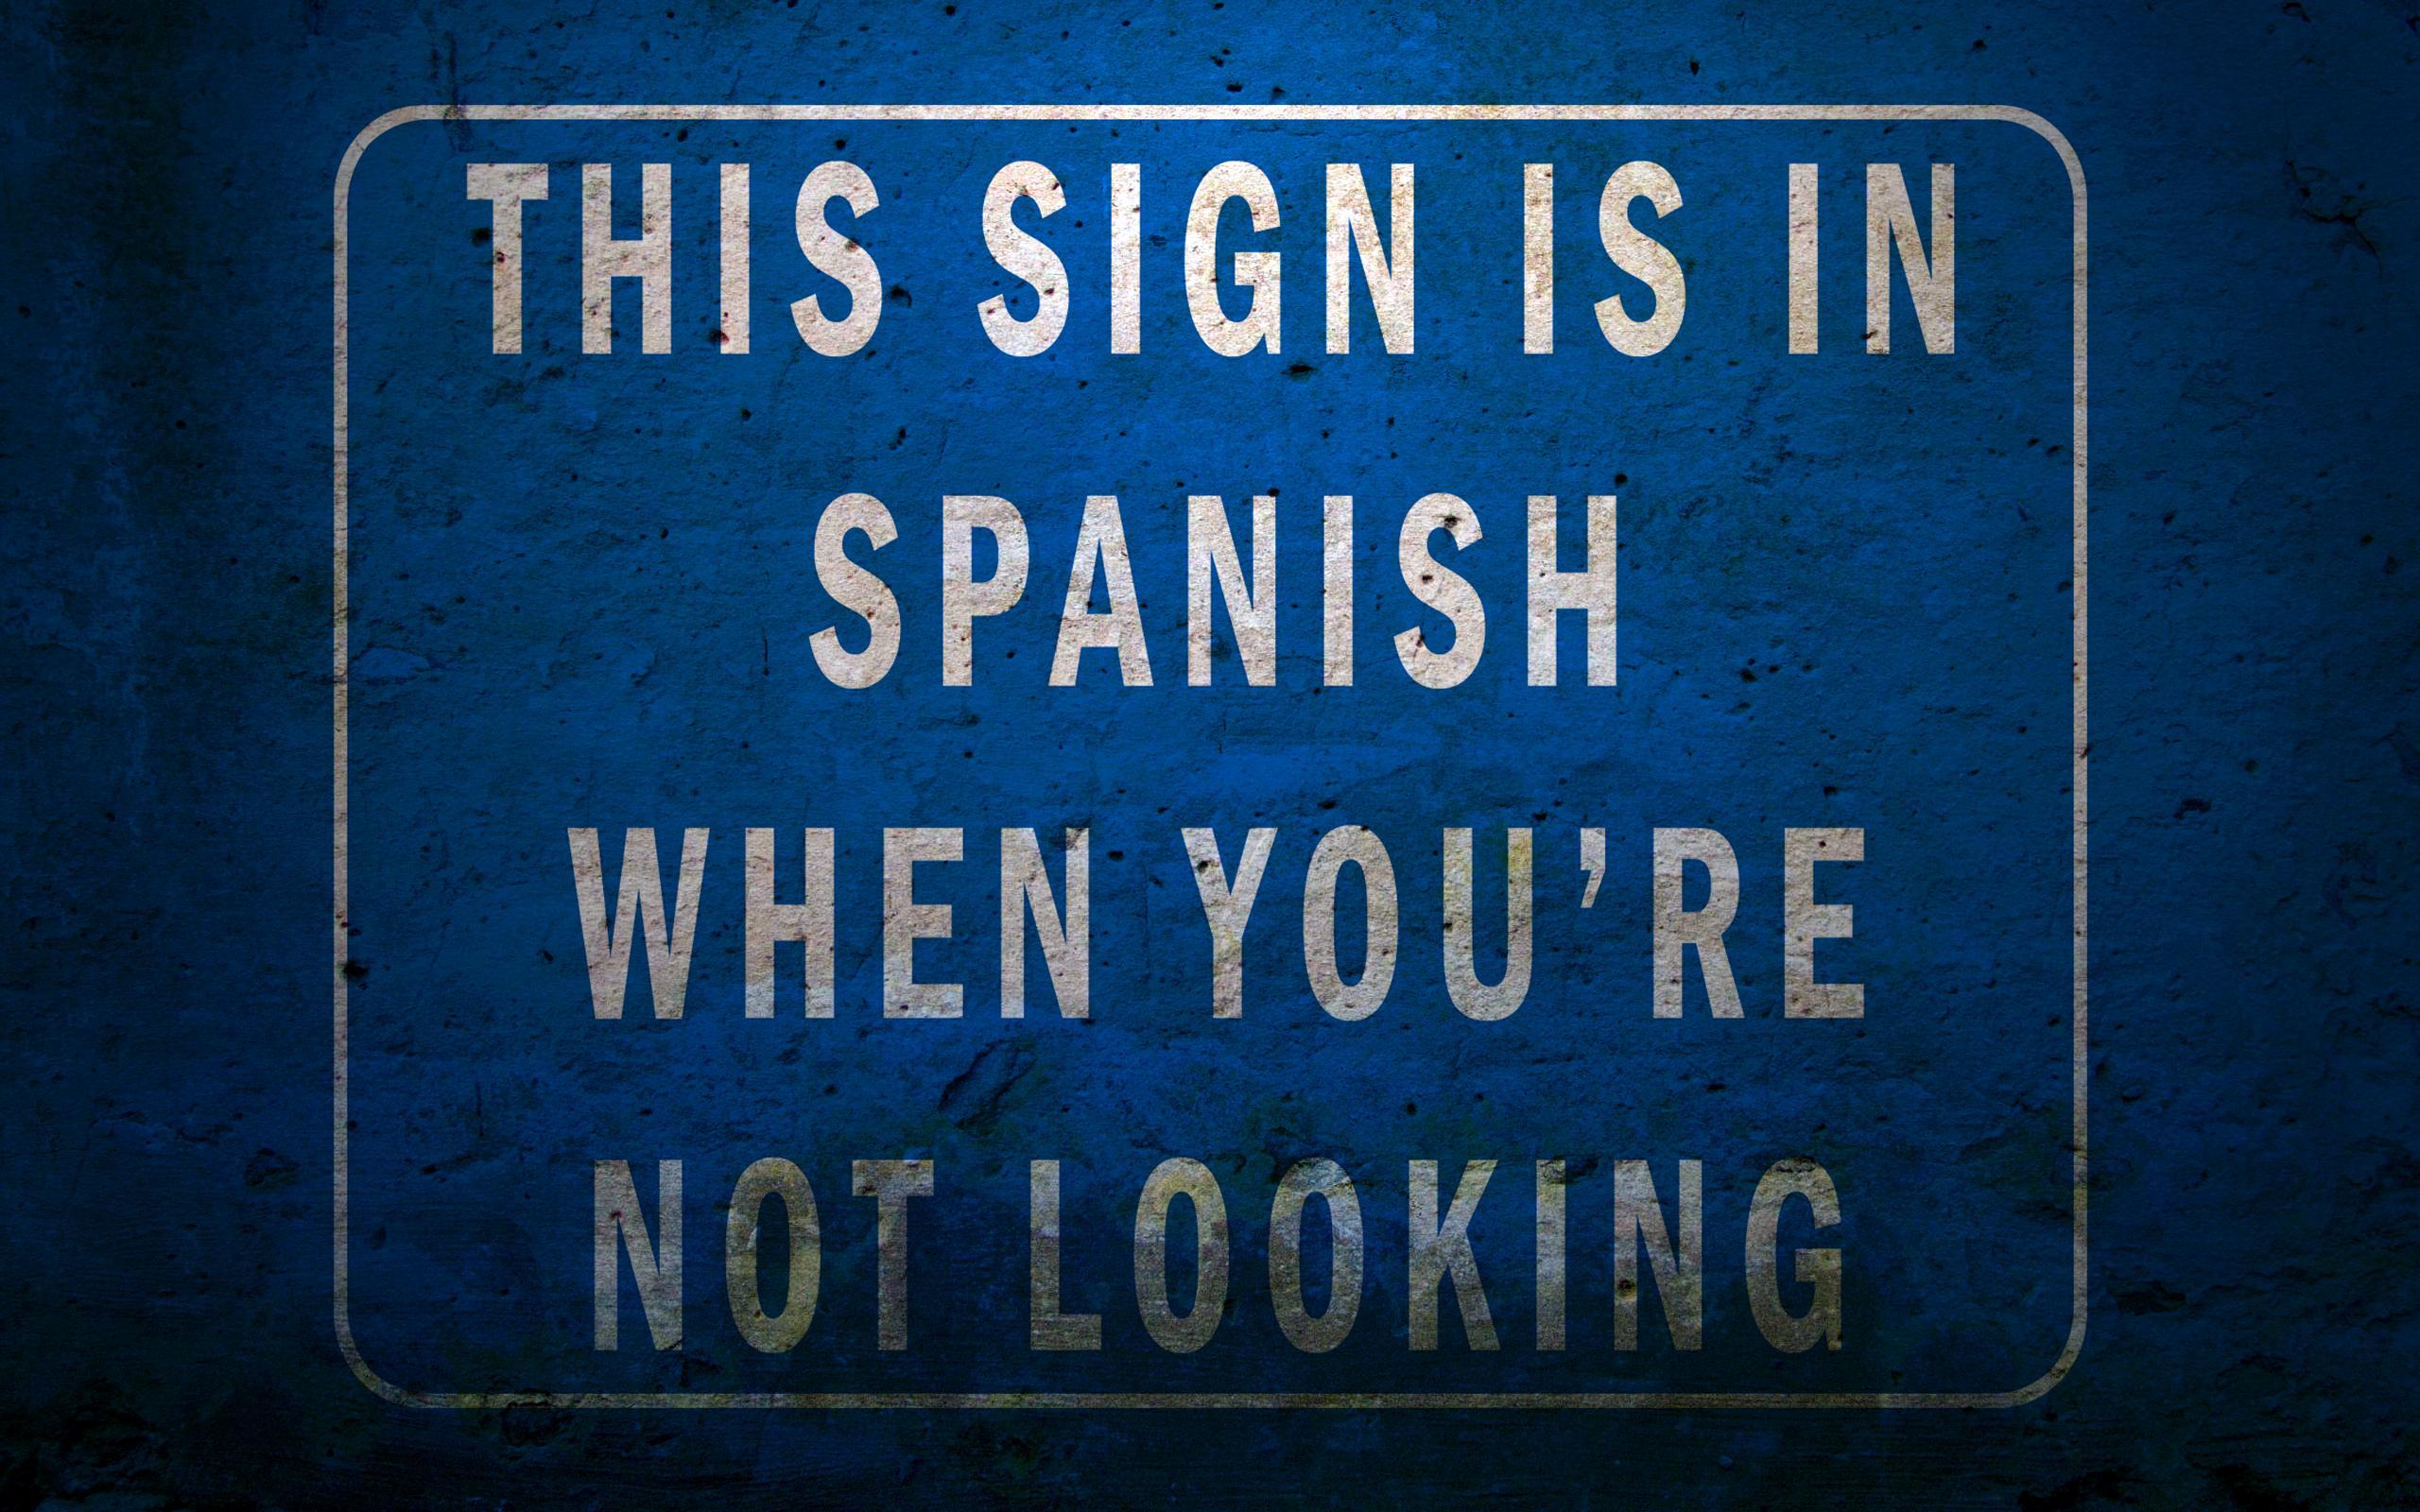 signs funny quantum physics im spanish HD Wallpaper. You are viewing